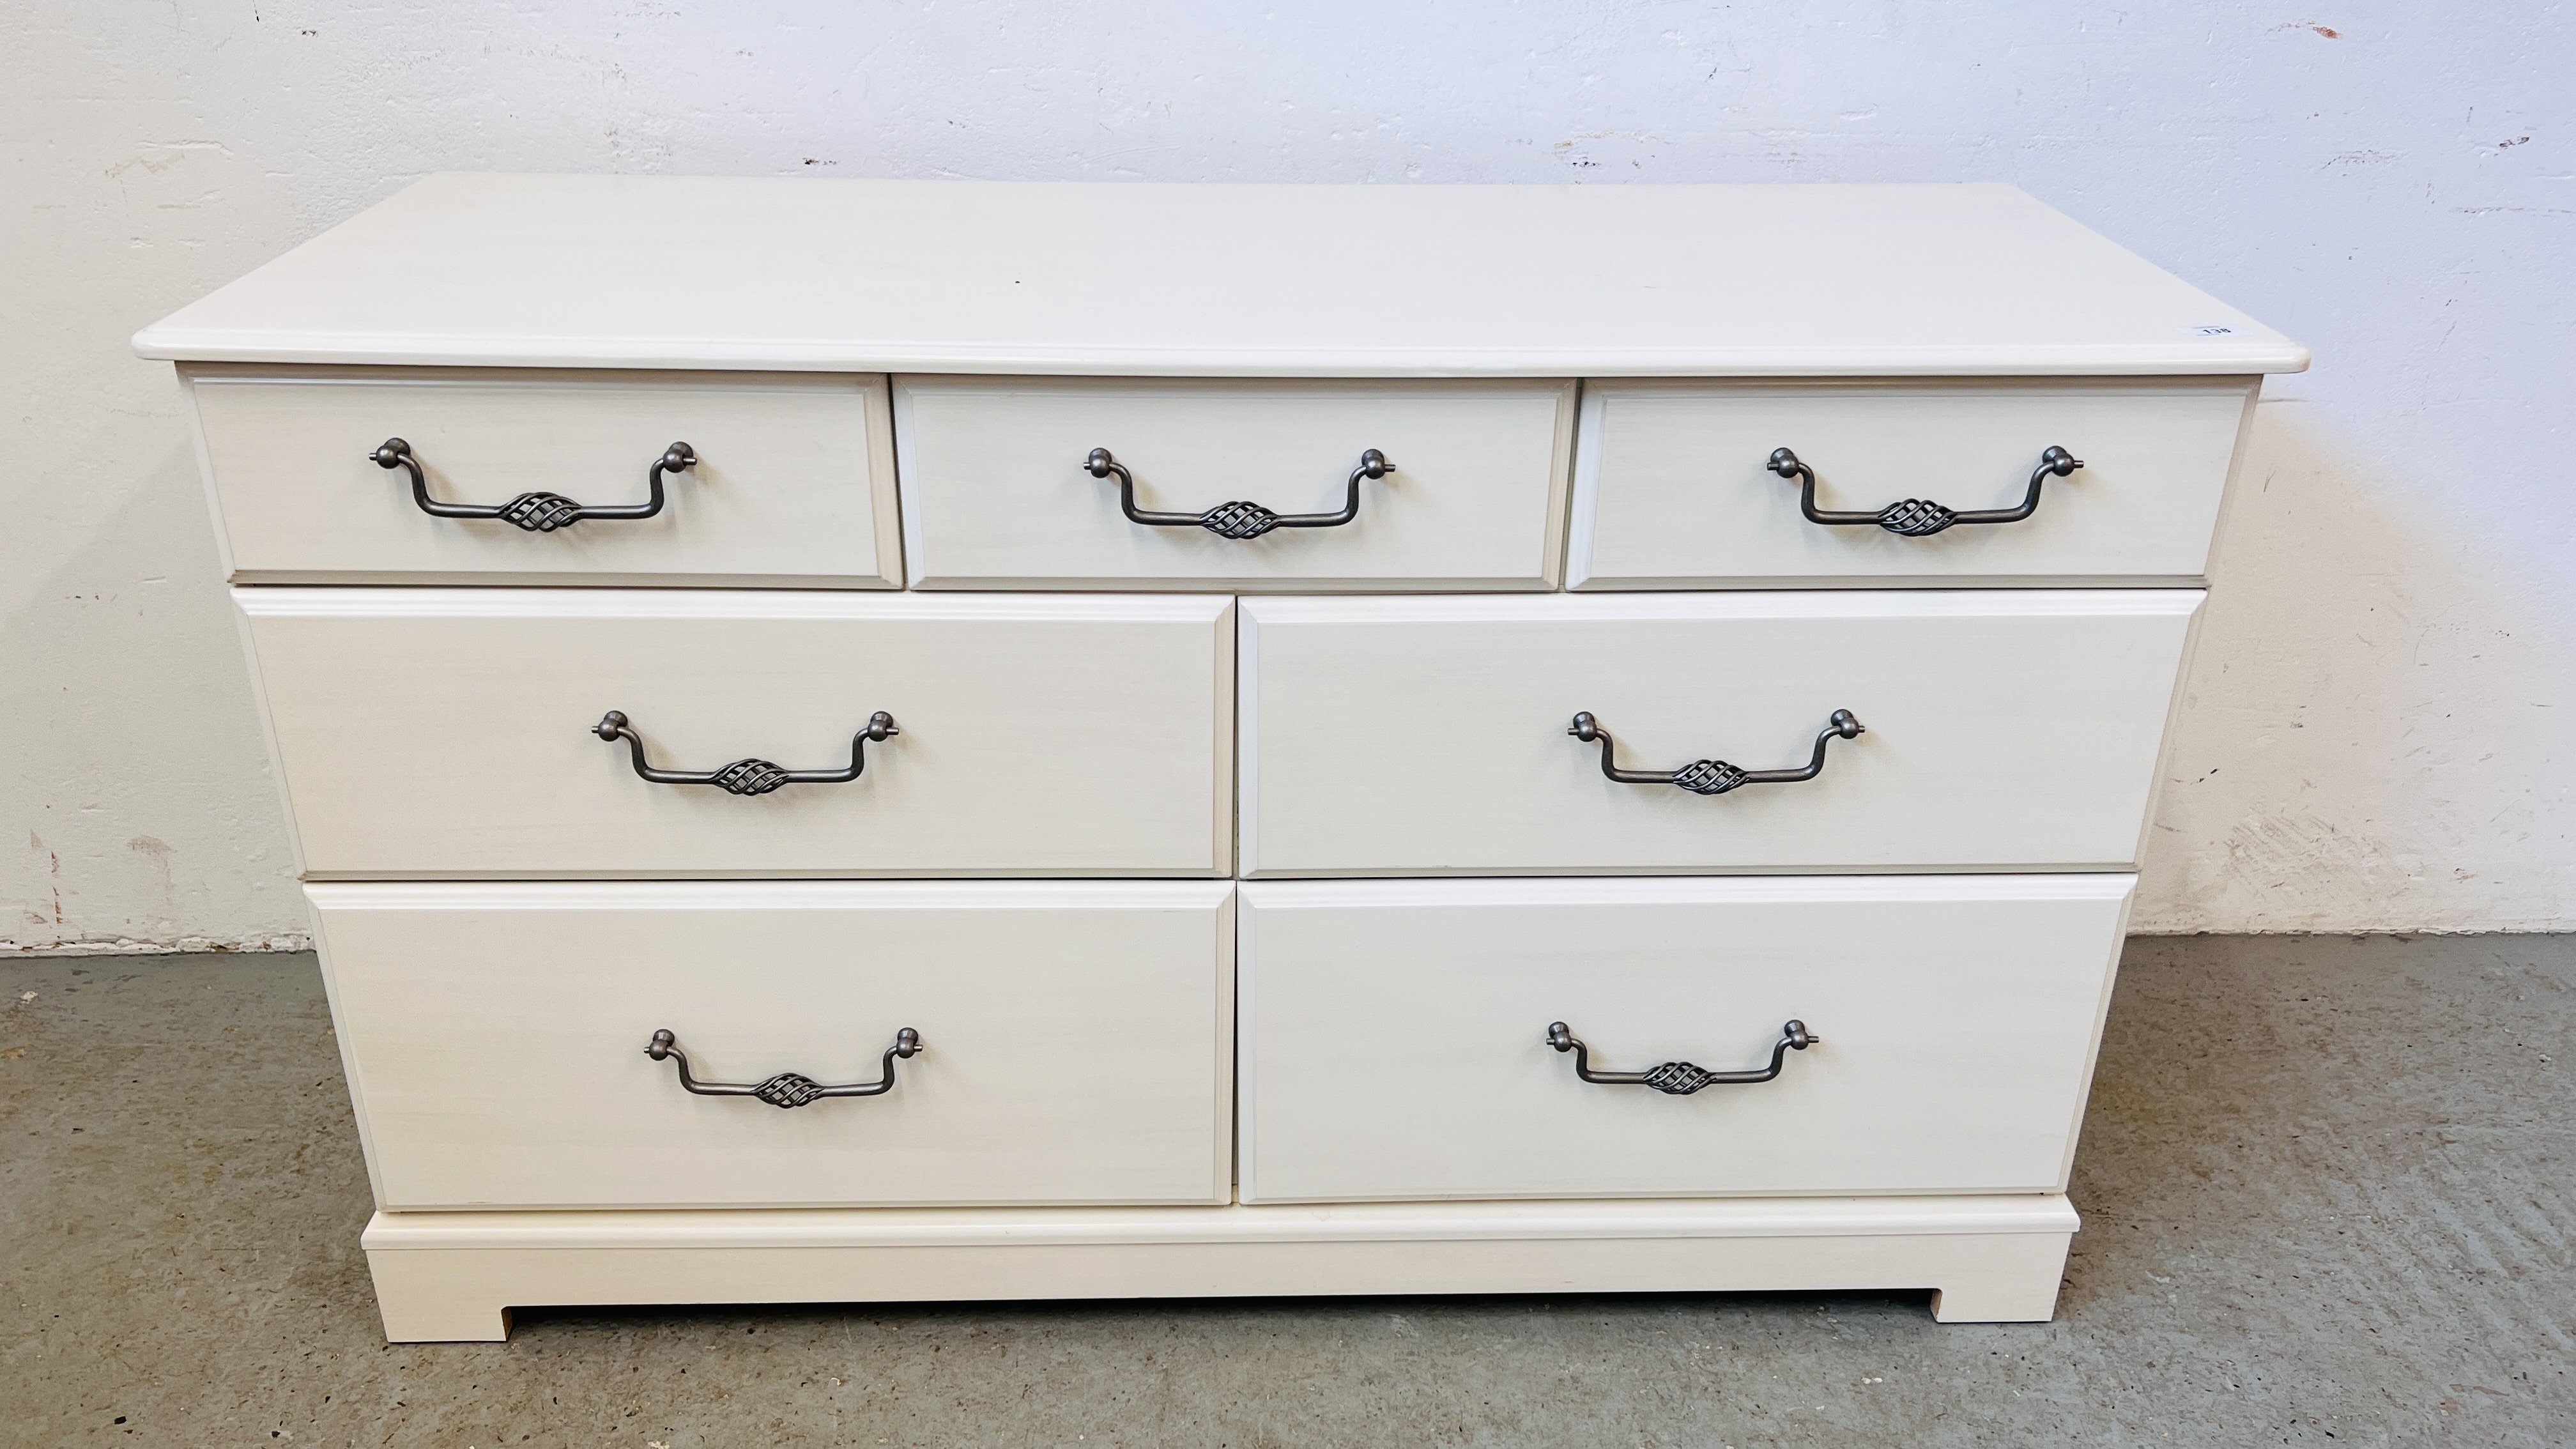 A GOOD QUALITY KINGSTOWN MODERN SEVEN DRAWER CHEST WITH METAL CRAFT HANDLES,